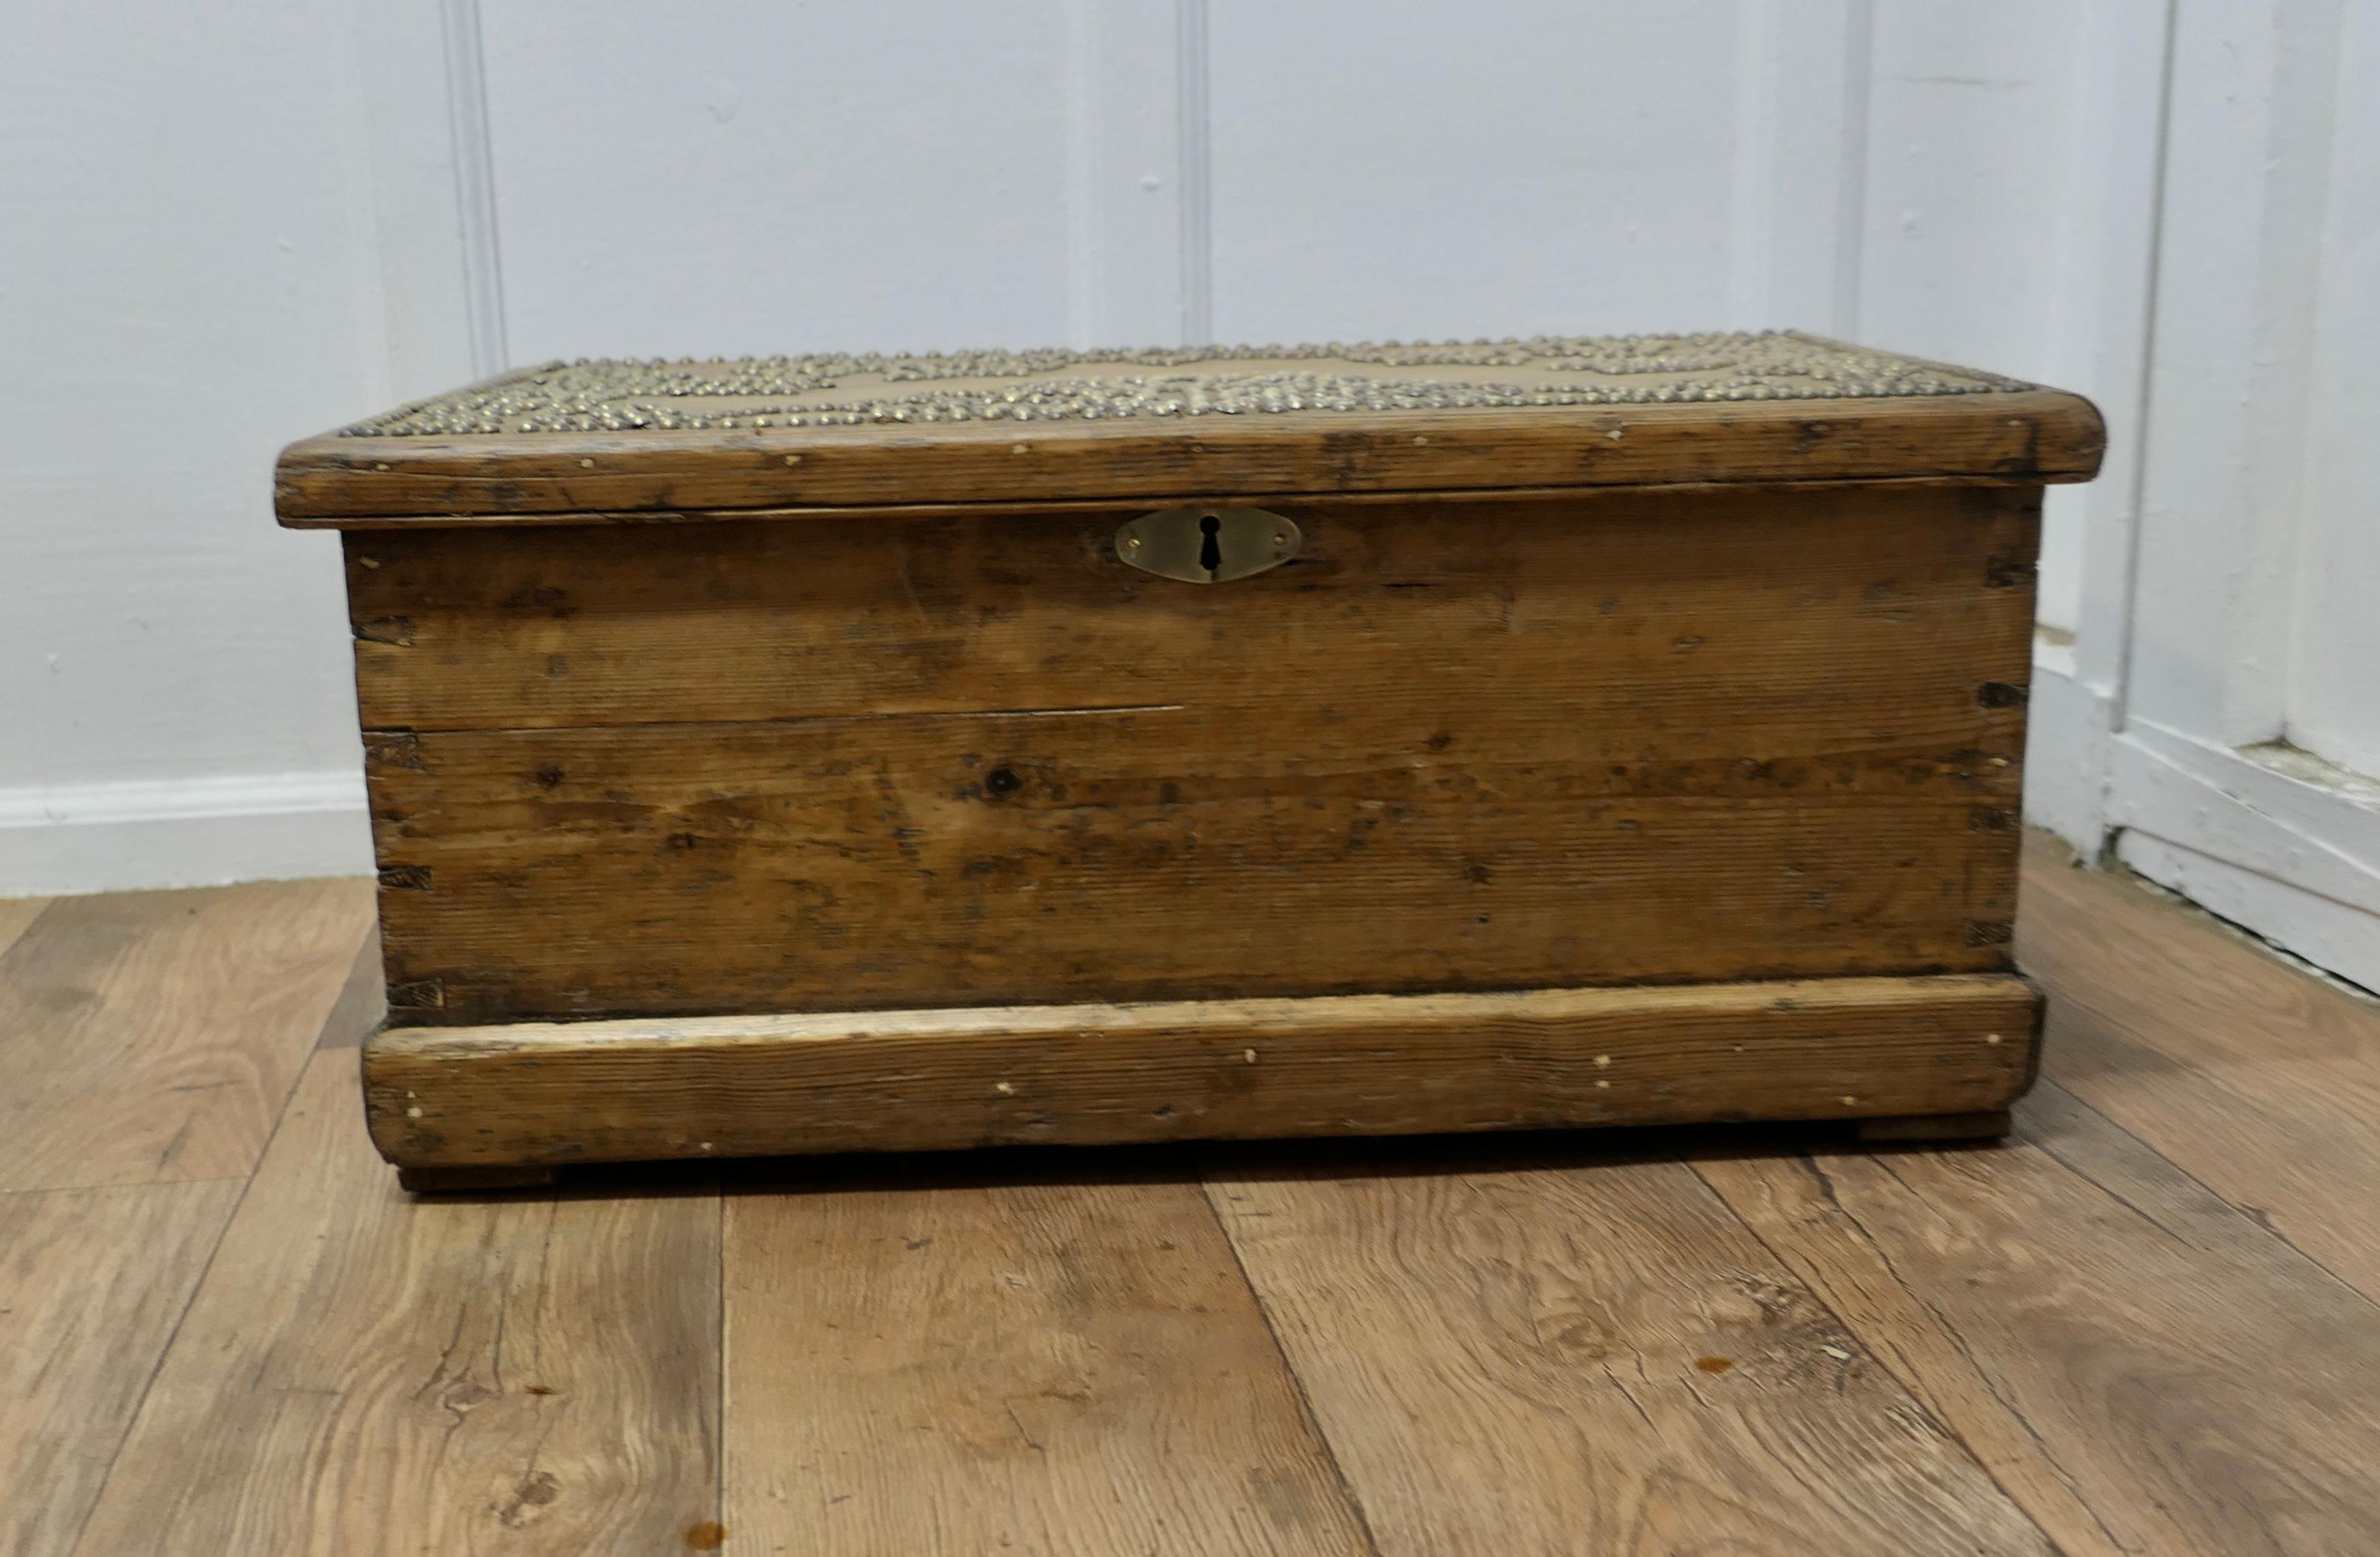 Decorated Victorian Pine Blanket Box with Stud-work Design
 
This is a very attractive pine box, it has been decorated with a tulip design in brass stud work 
The pine has darkened with age, the box has its original iron carrying handles and iron